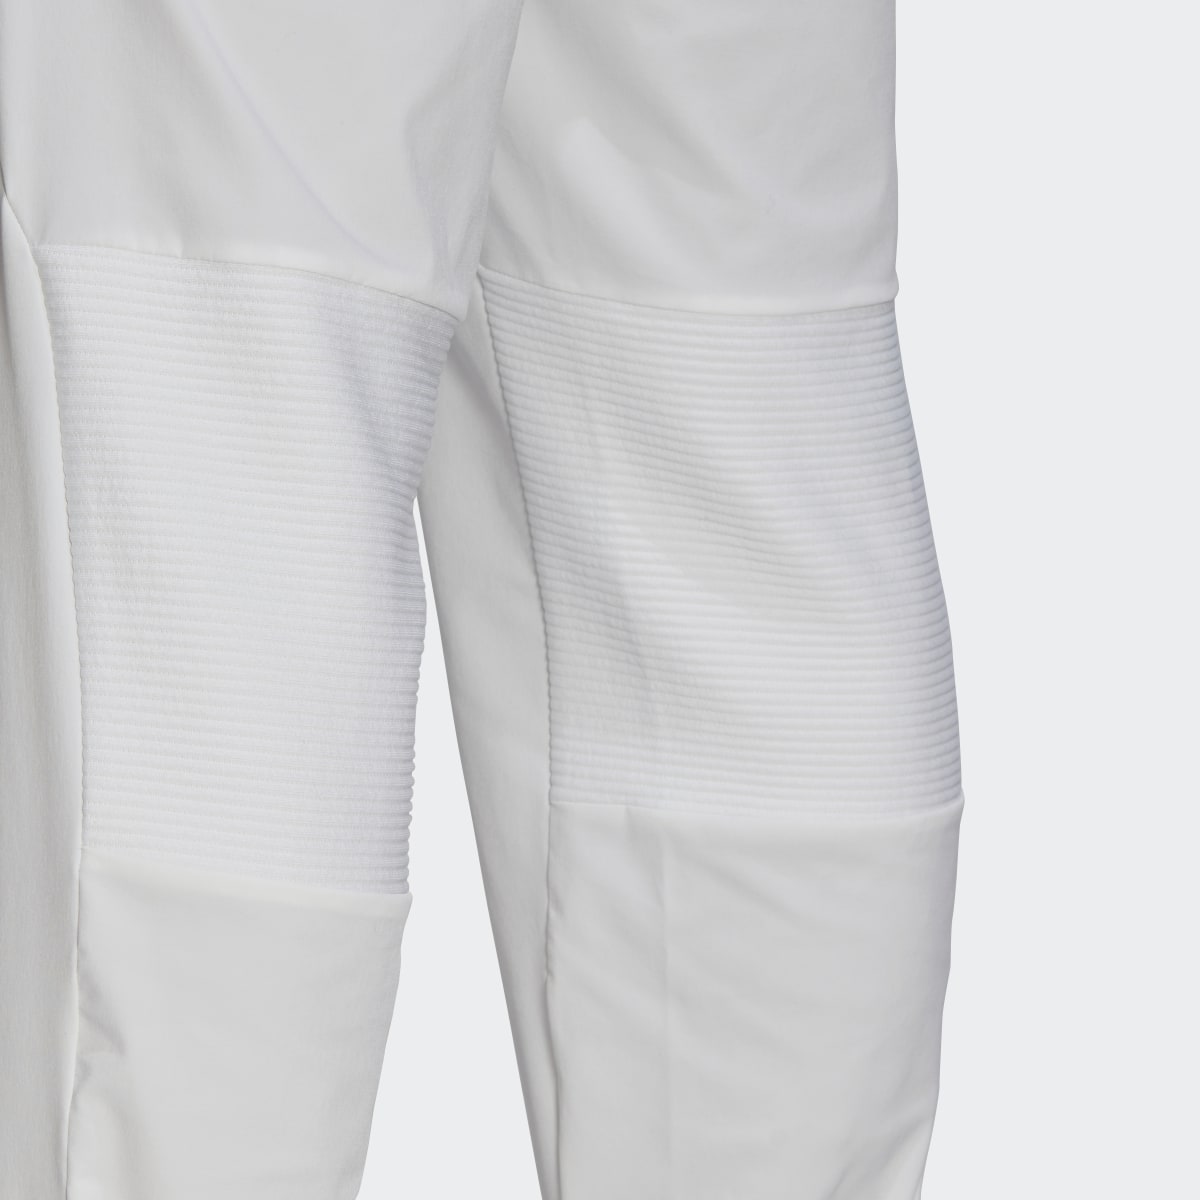 Adidas Designed for Gameday Pants. 8